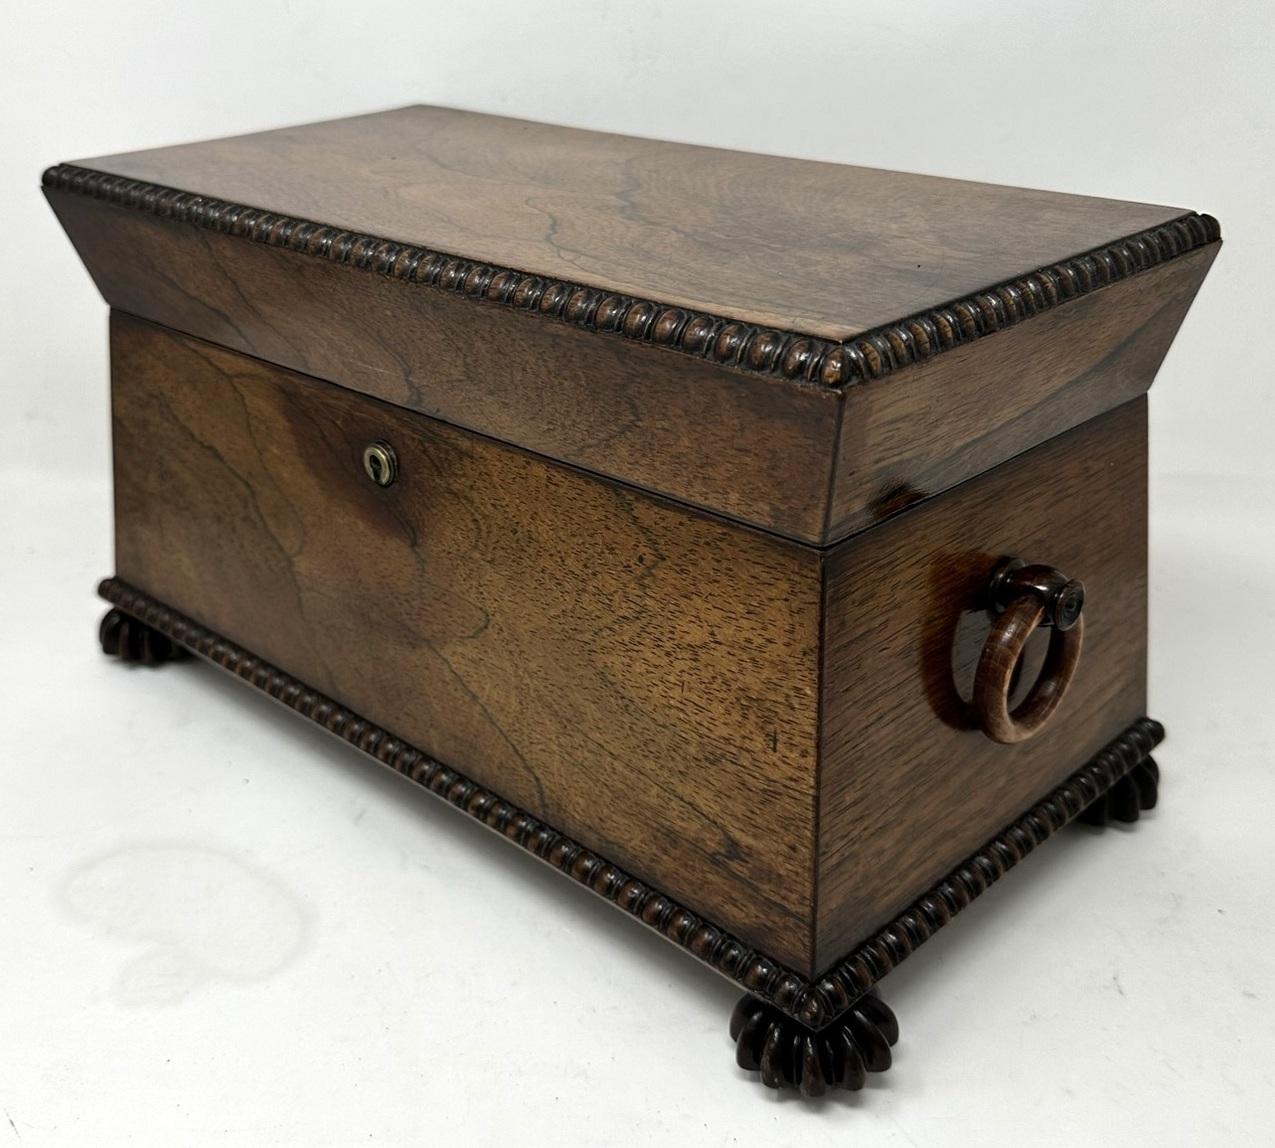 A Superb Example of an English Late Regency Period Well Grained Flame Mahogany Double Interior Section Tea Caddy of Rectangular outline and outstanding quality and generous proportions, firmly attributed to English Furniture makers Gillows of